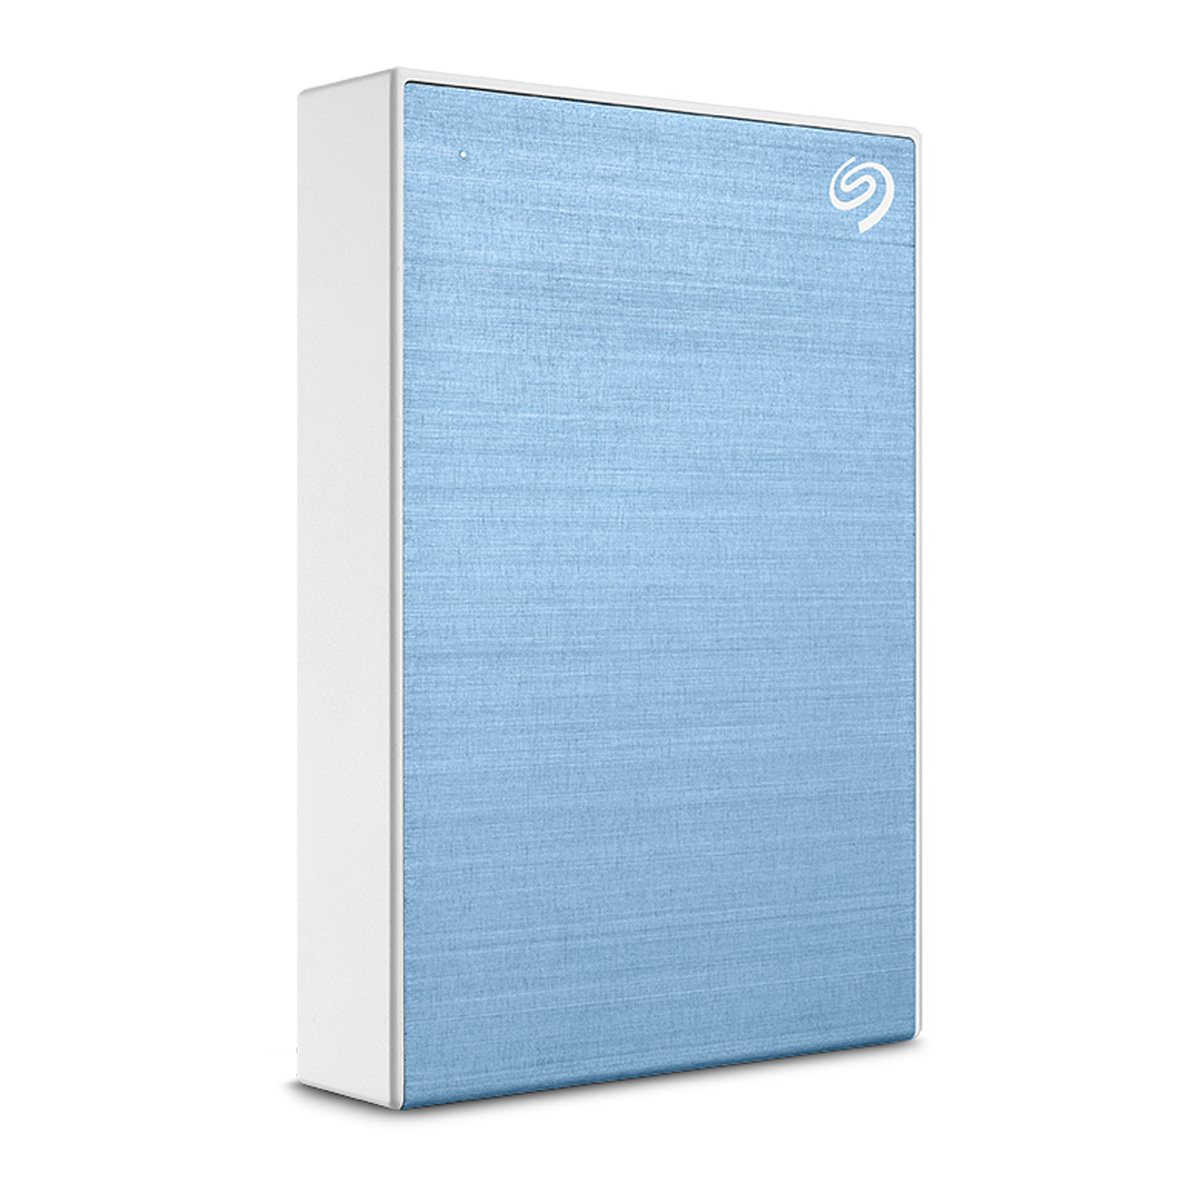 Seagate One Touch External HDD with Password Protection, 1 TB, Blue, STKY1000402